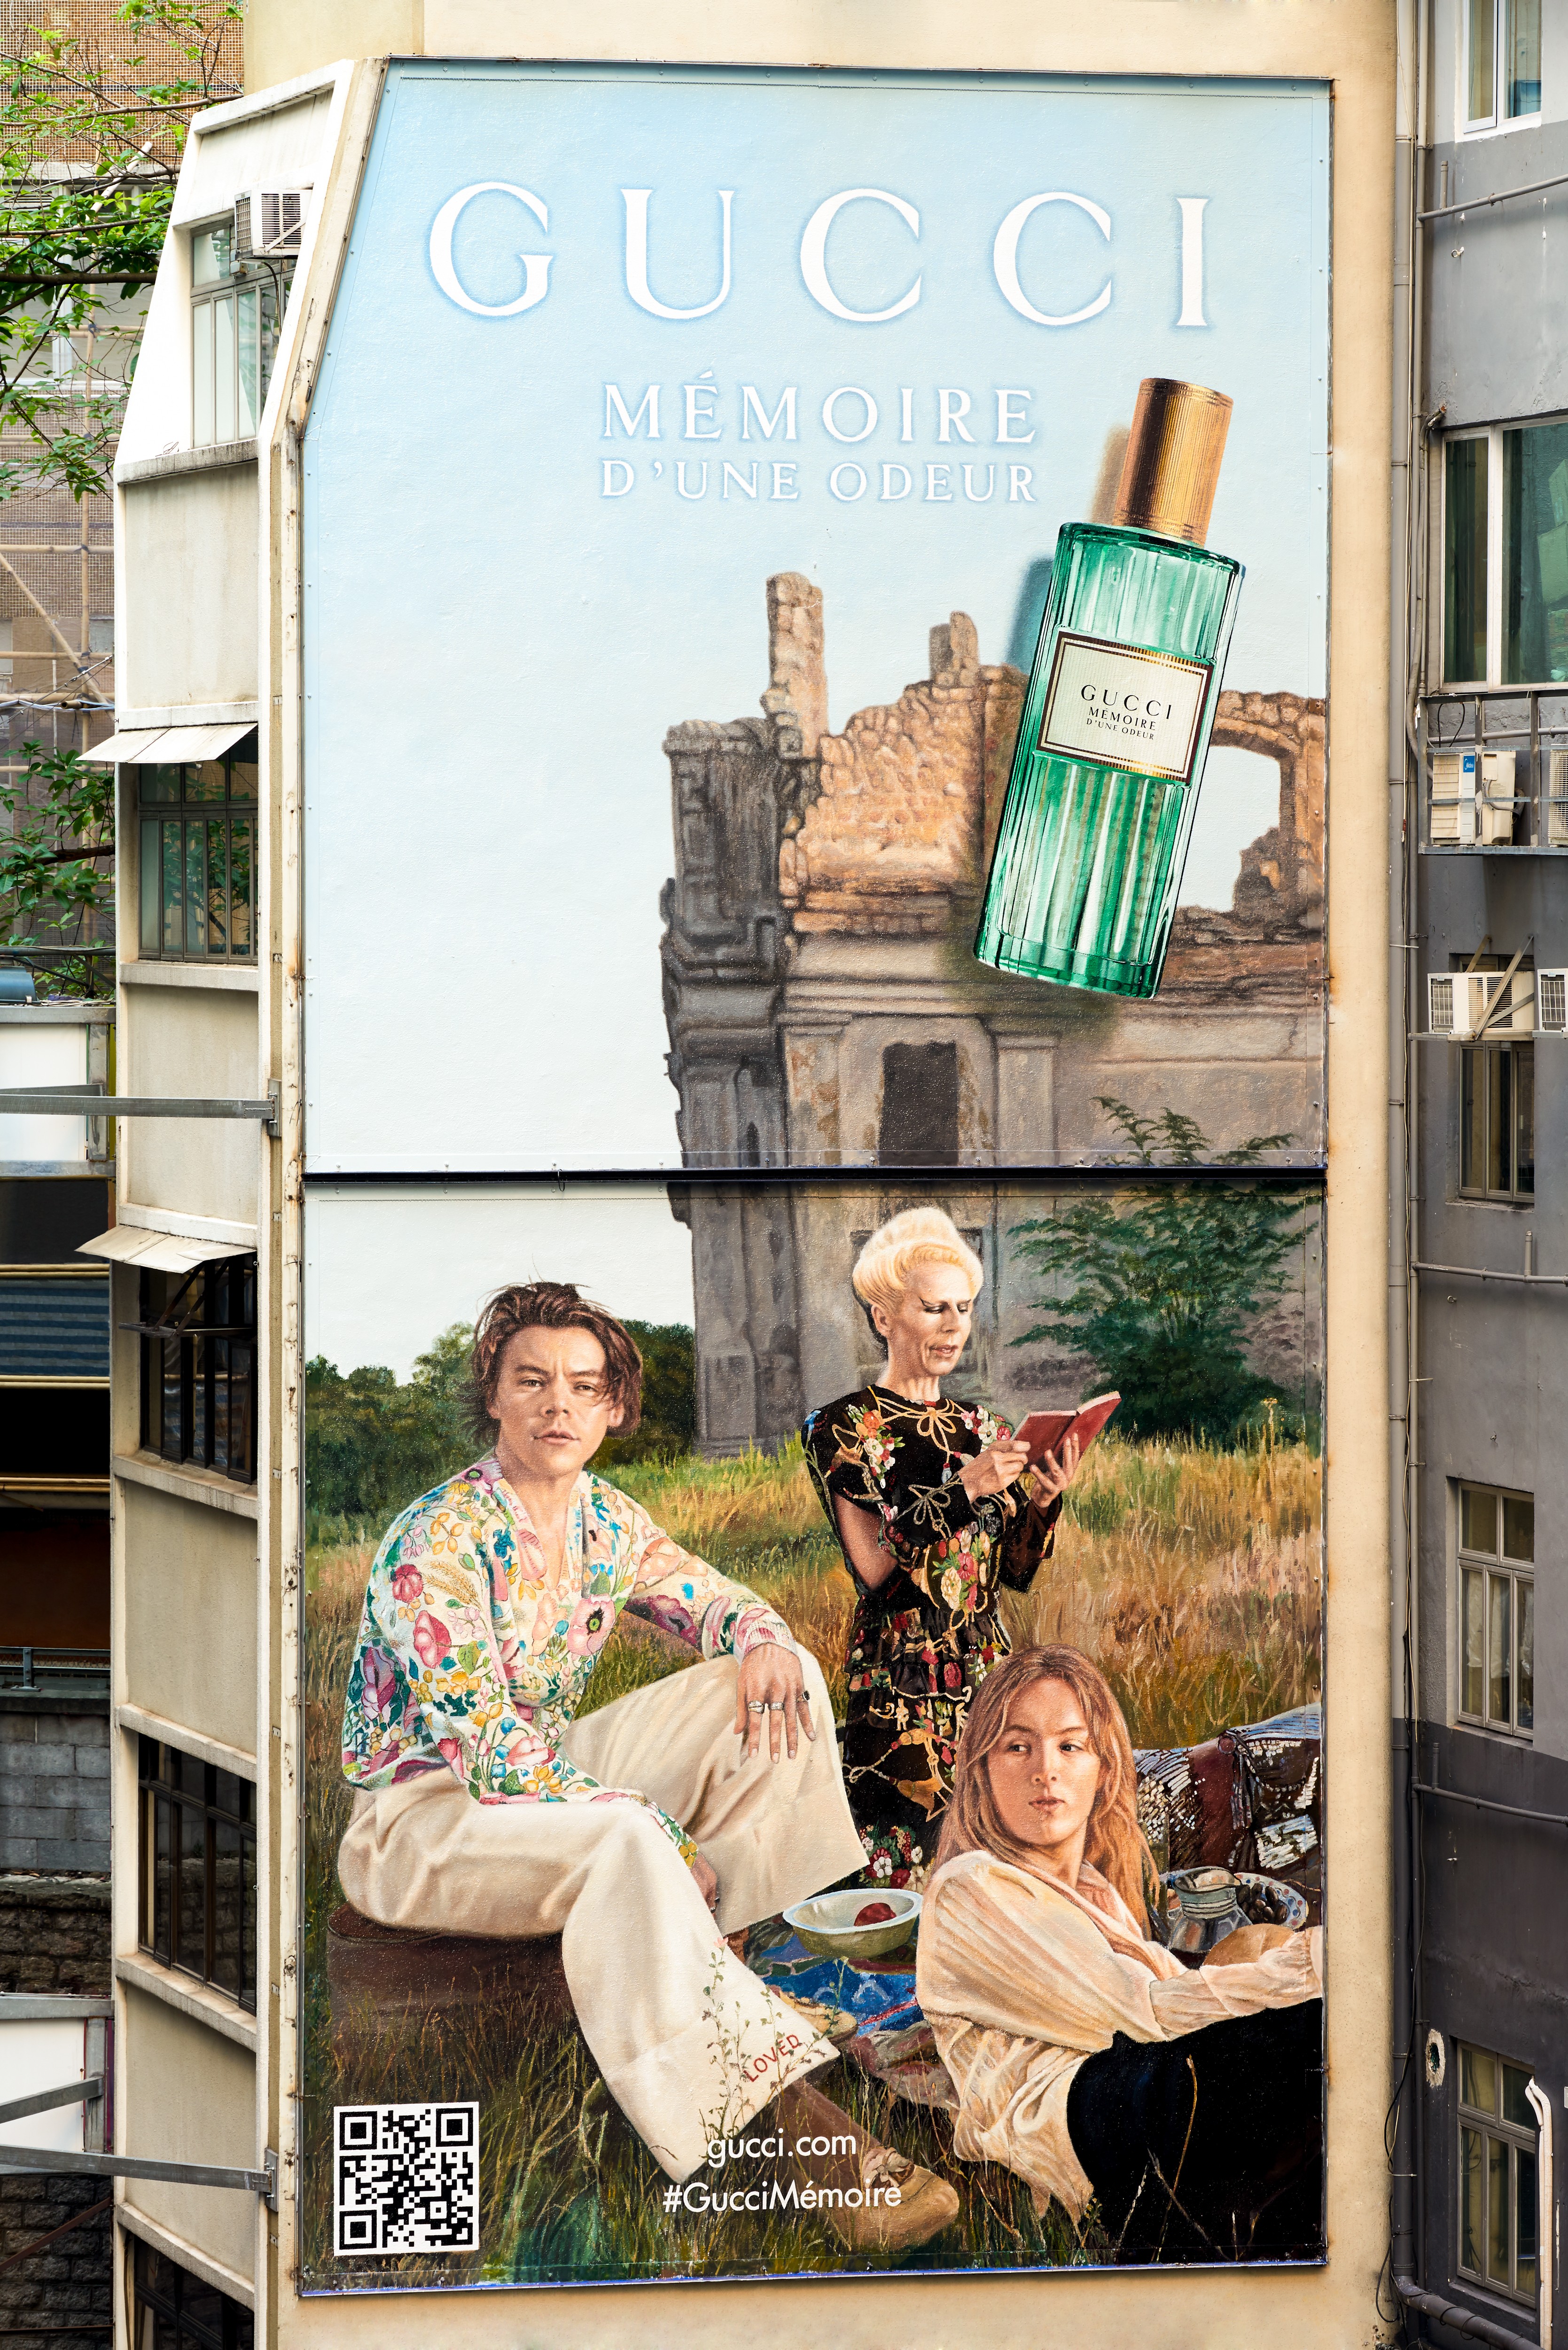 Gucci’s new Art Wall treatment has appeared on Hong Kong’s D’Aguilar Street – starring an eccentric cast of models, musicians and artists, including singer Harry Styles. Photos: Gucci